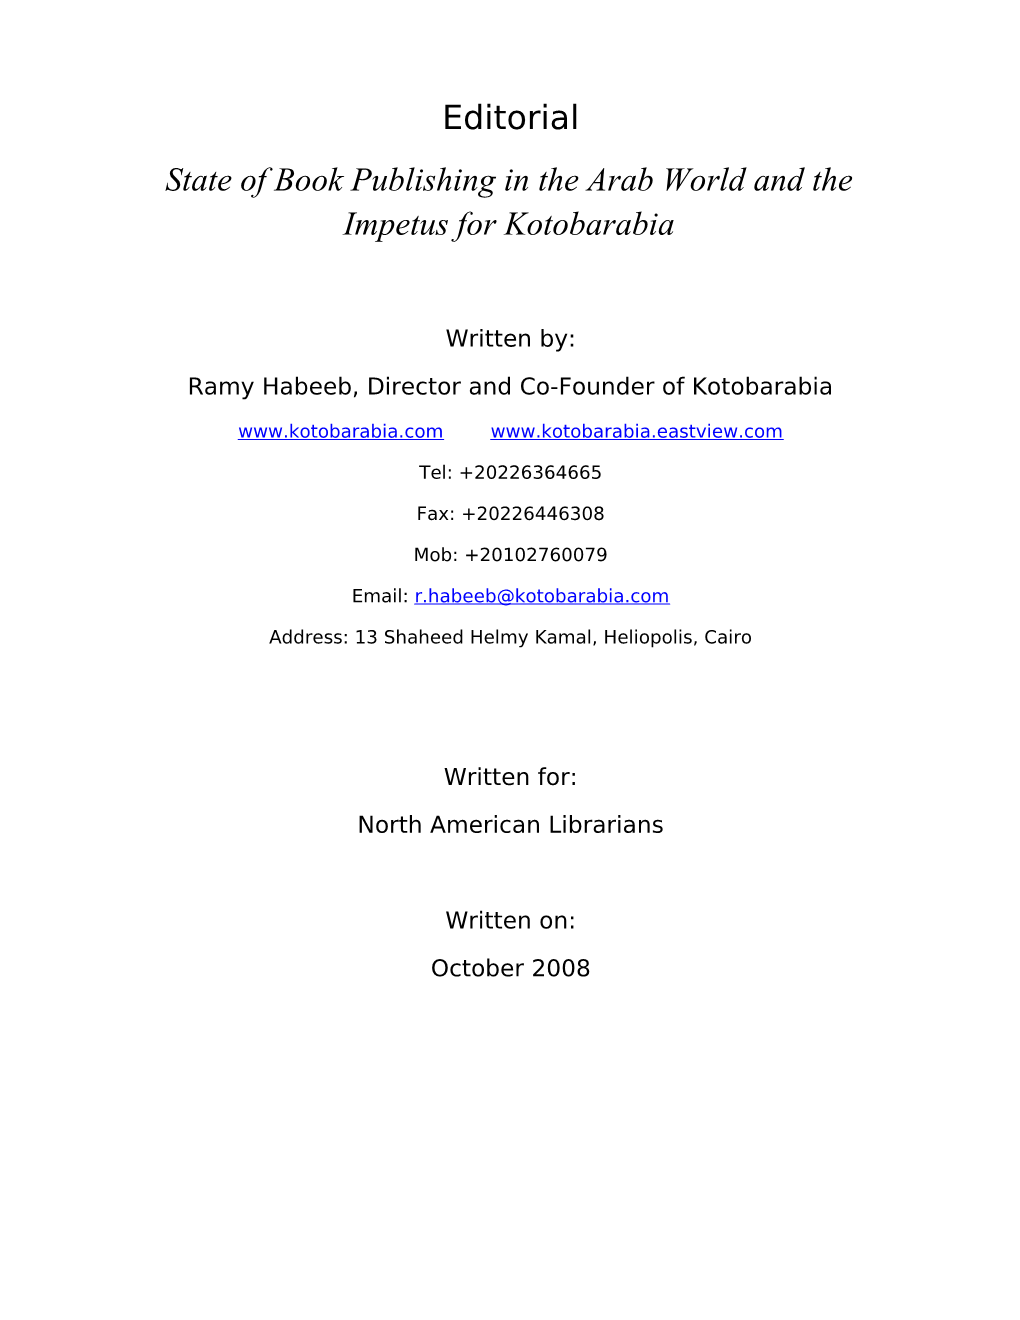 State of Book Publishing in the Arab World and the Impetus for Kotobarabia